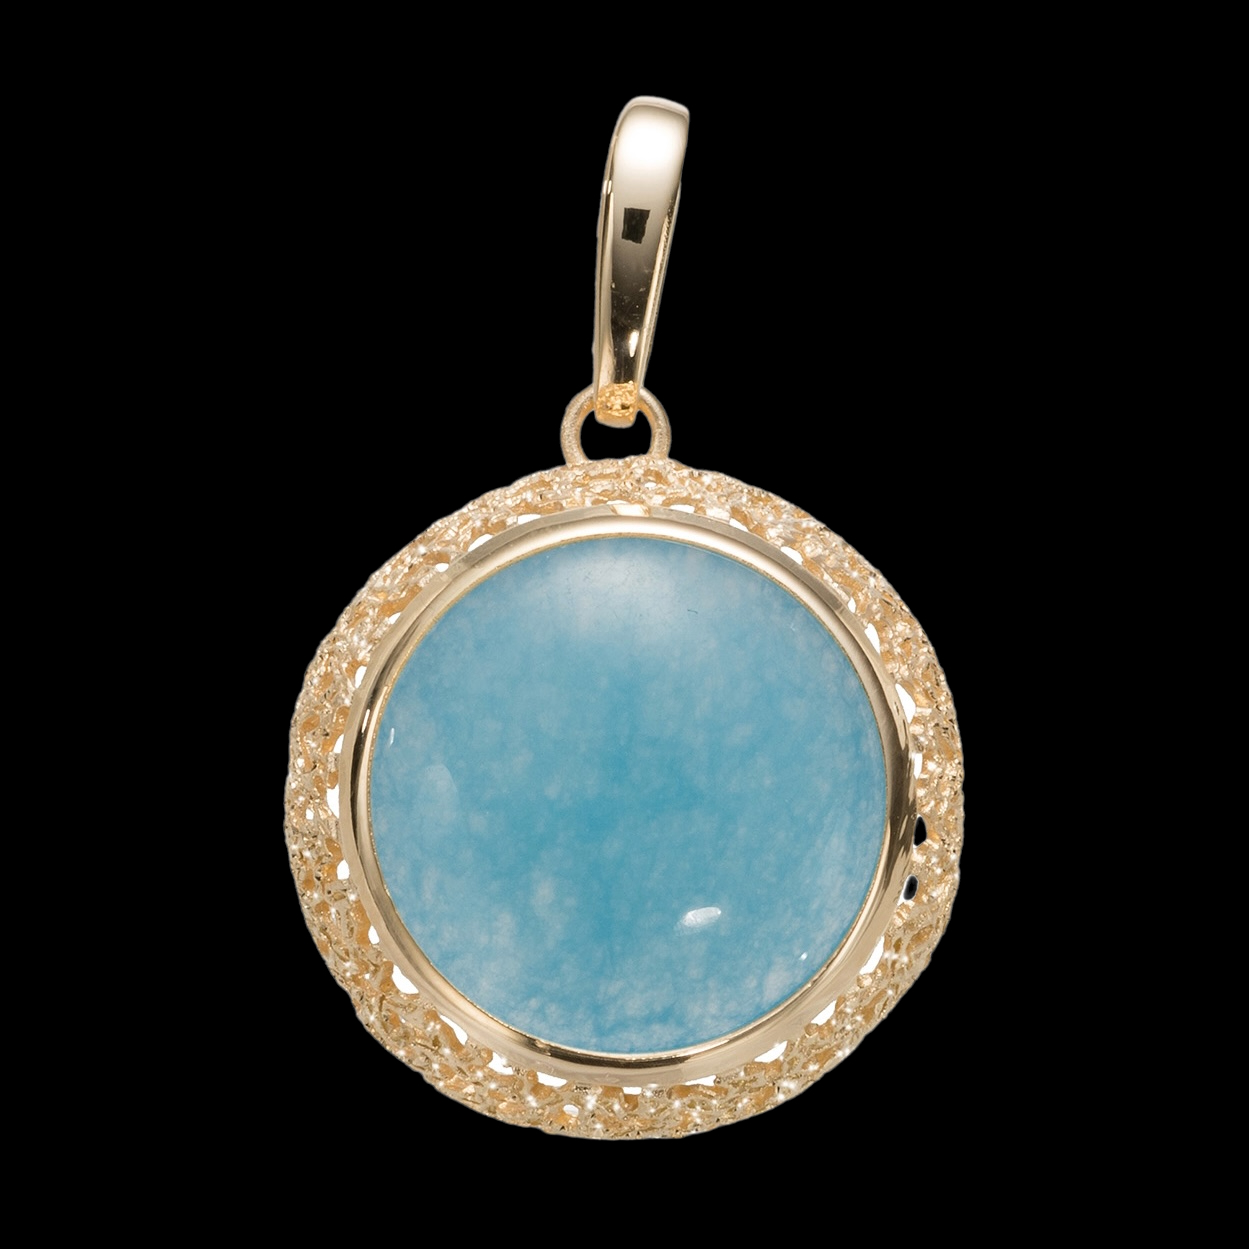 Crafted gold plated pendant with a blue quartz stone